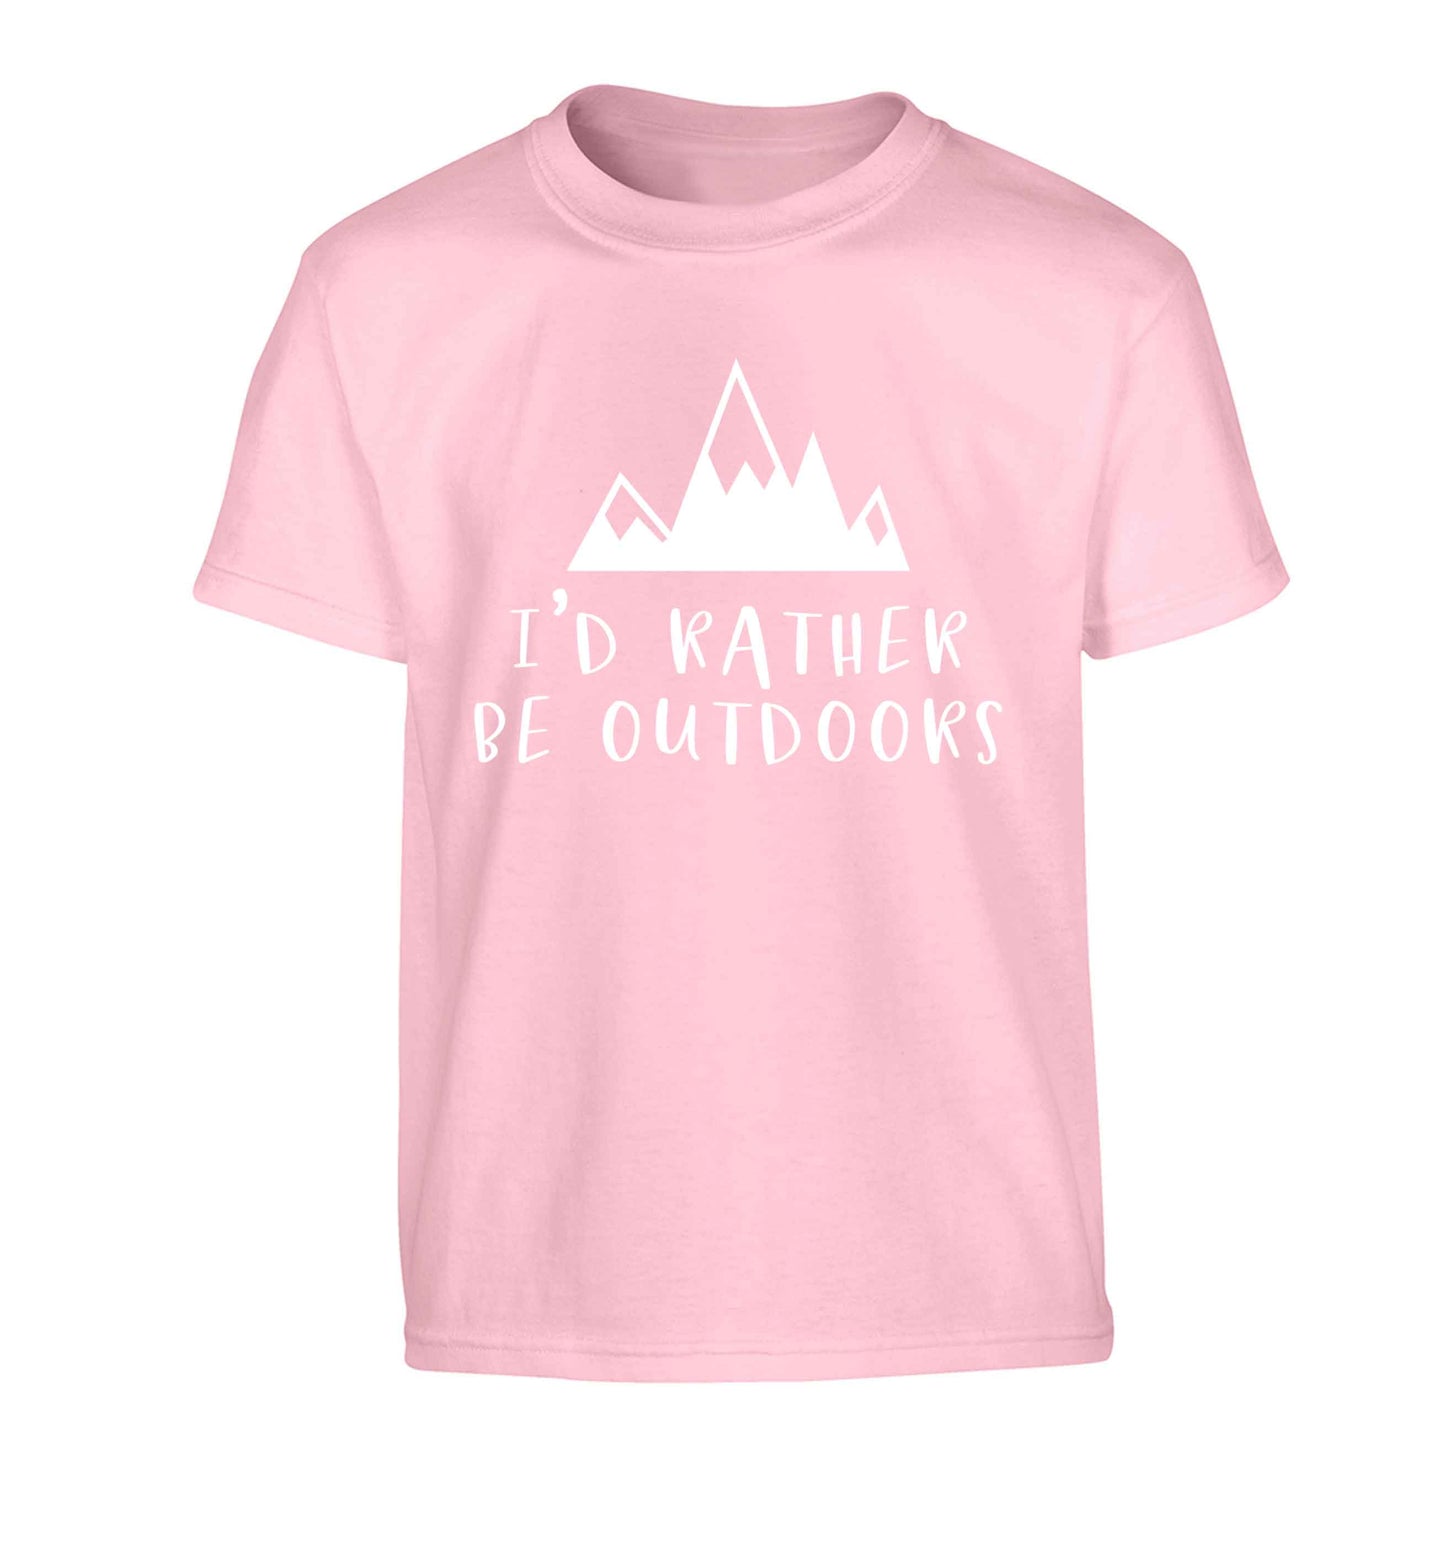 I'd rather be outdoors Children's light pink Tshirt 12-13 Years